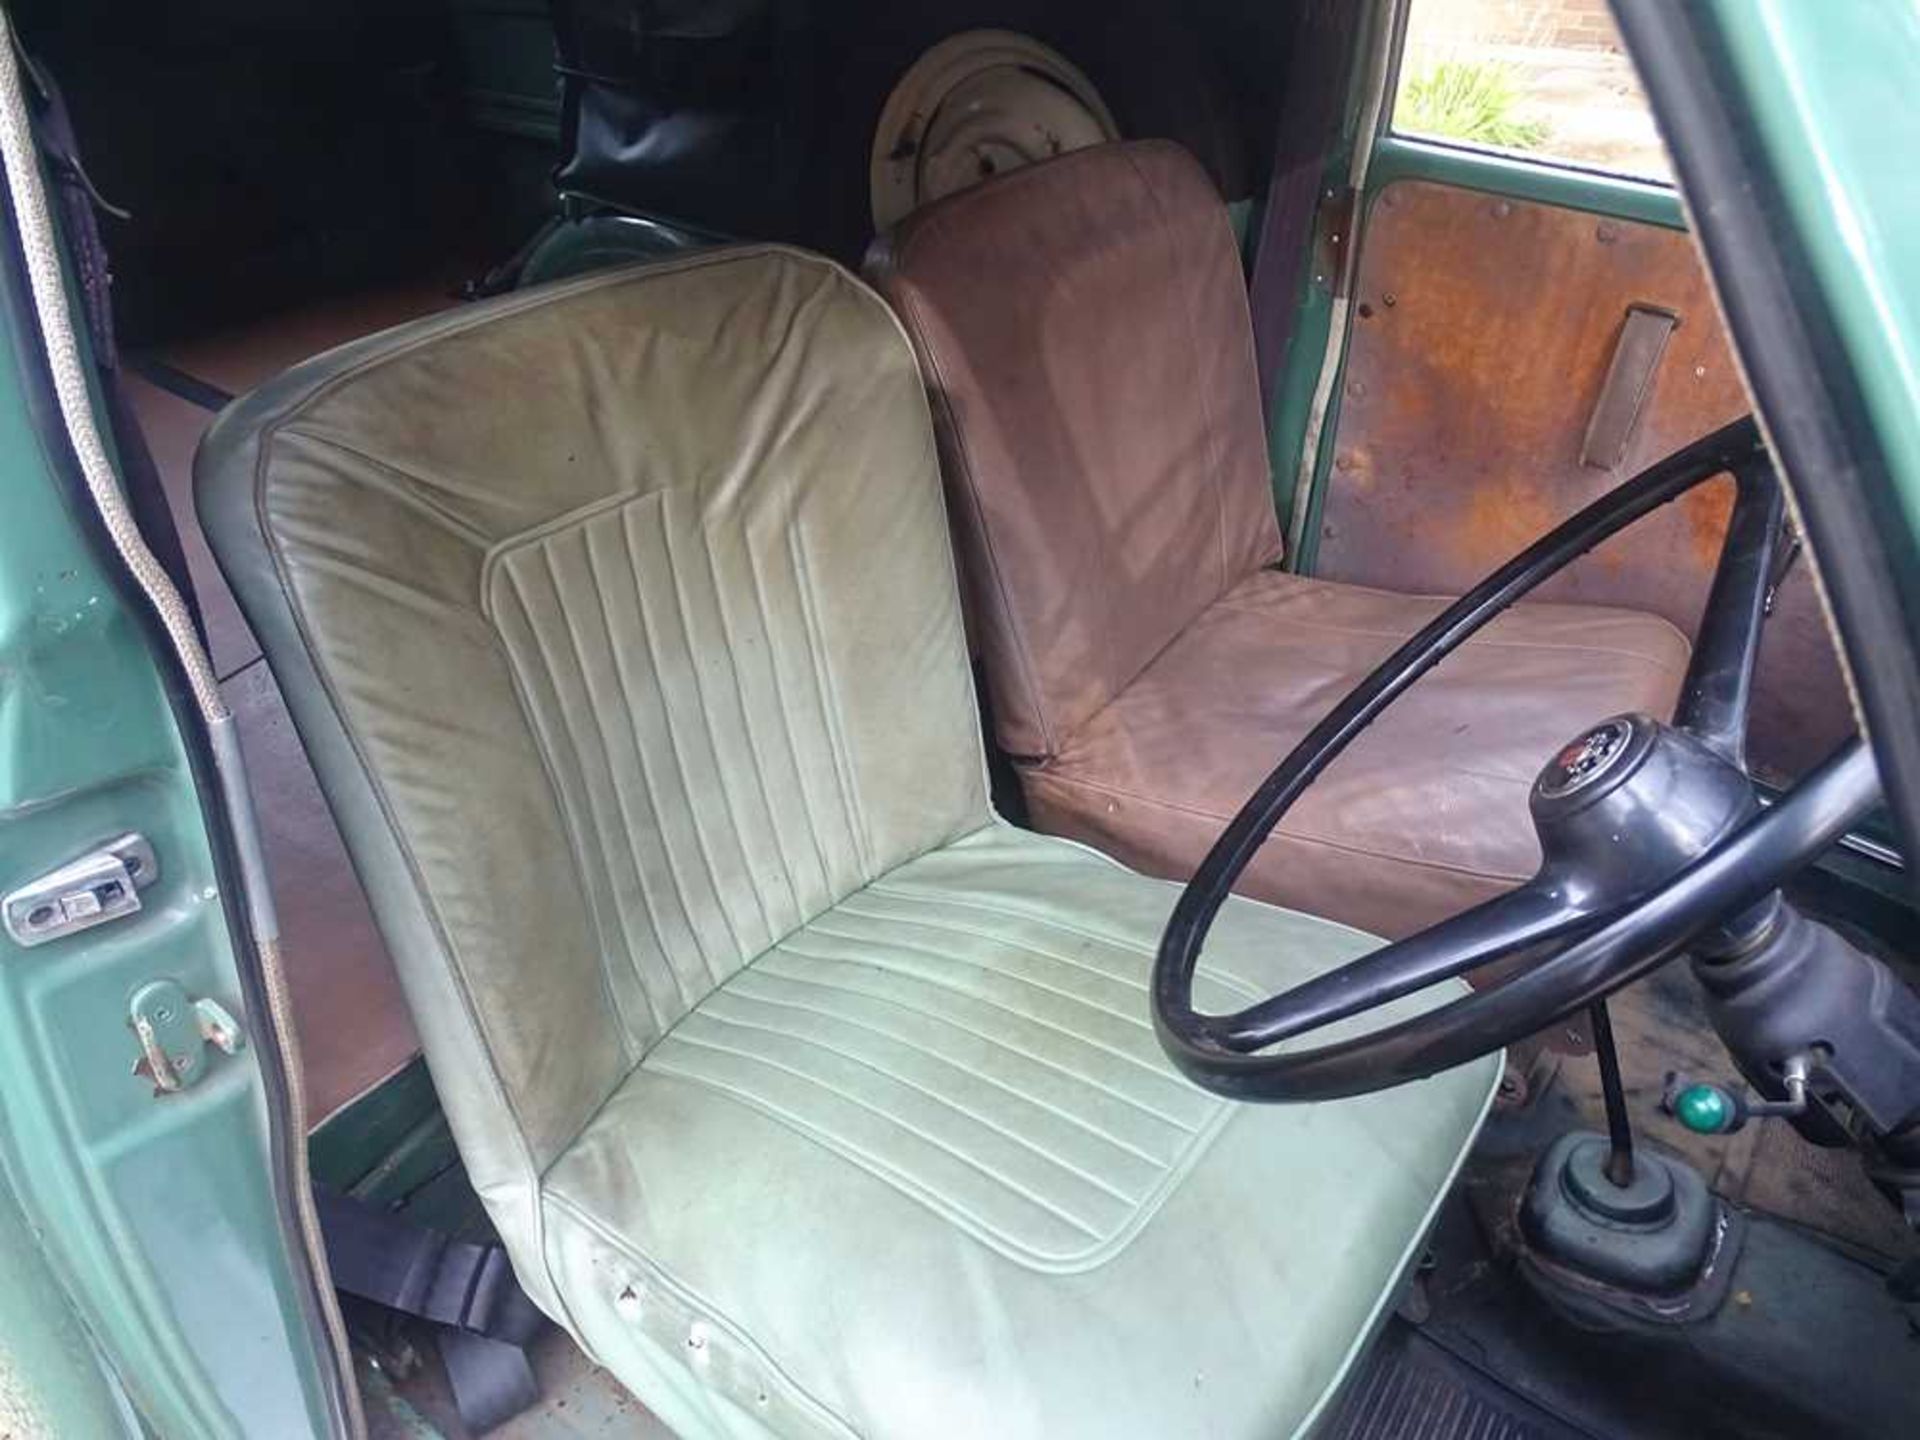 1970 Austin 6 CWT Van Single Family Ownership From New - Image 29 of 45